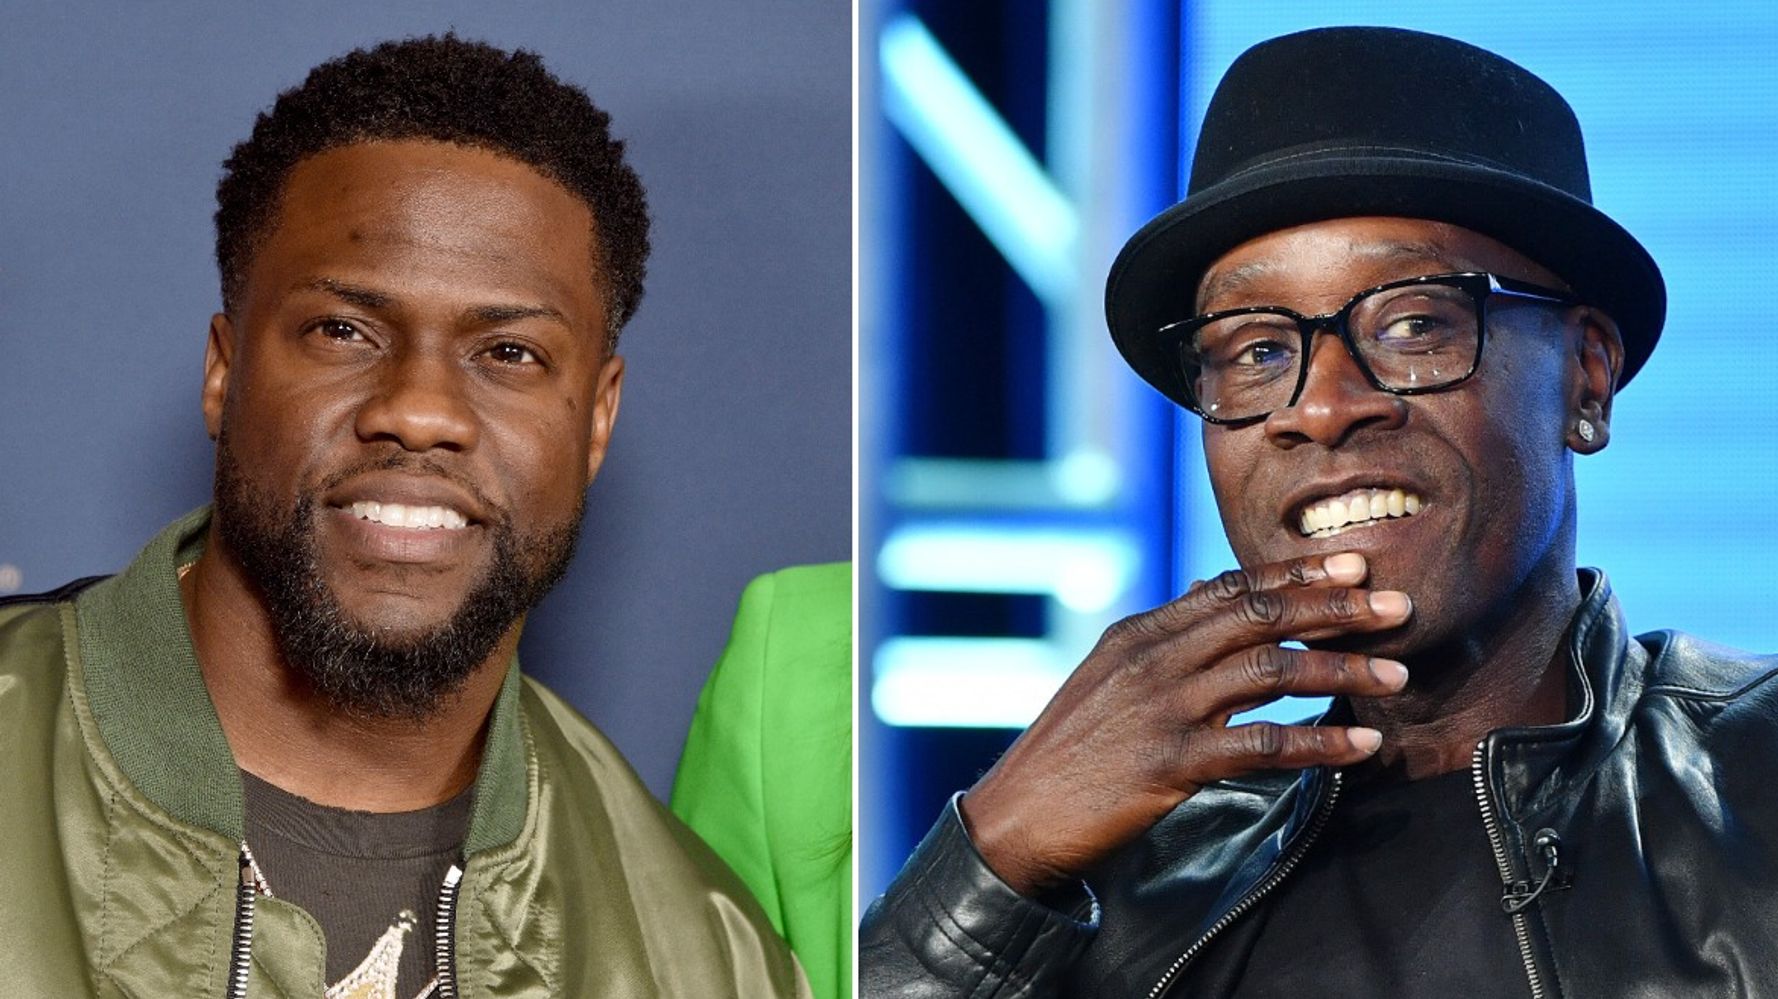 kevin-hart-reacts-to-learning-don-cheadle-s-age-in-hilarious-exchange